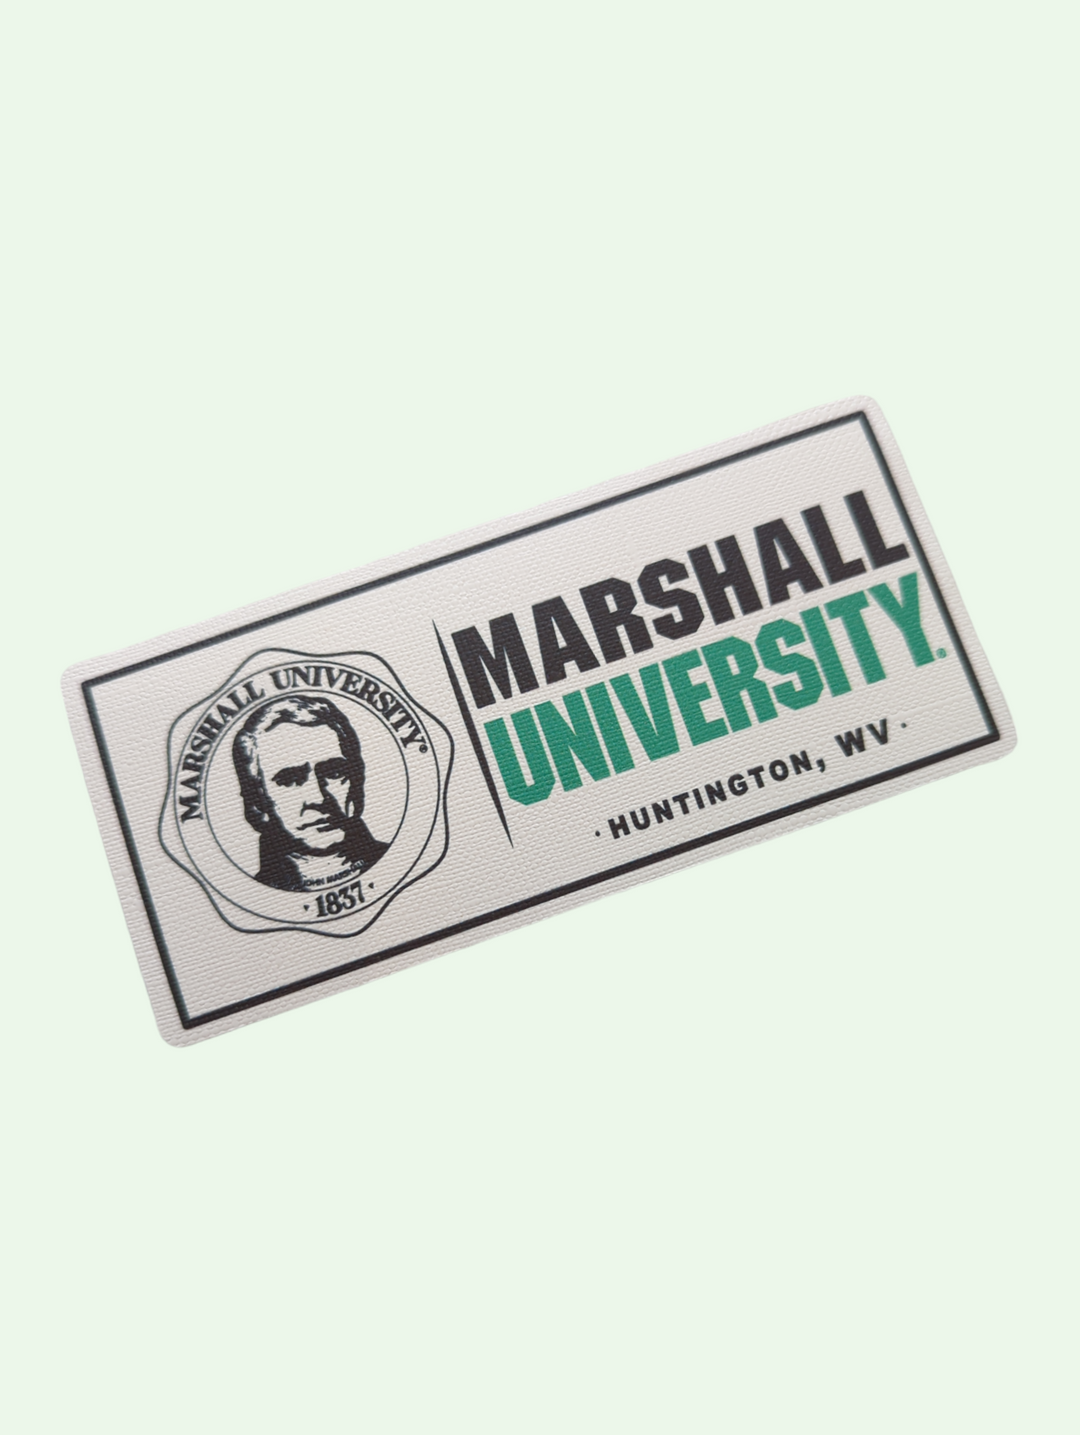 a photo of the sticker with the john marshall seal on it